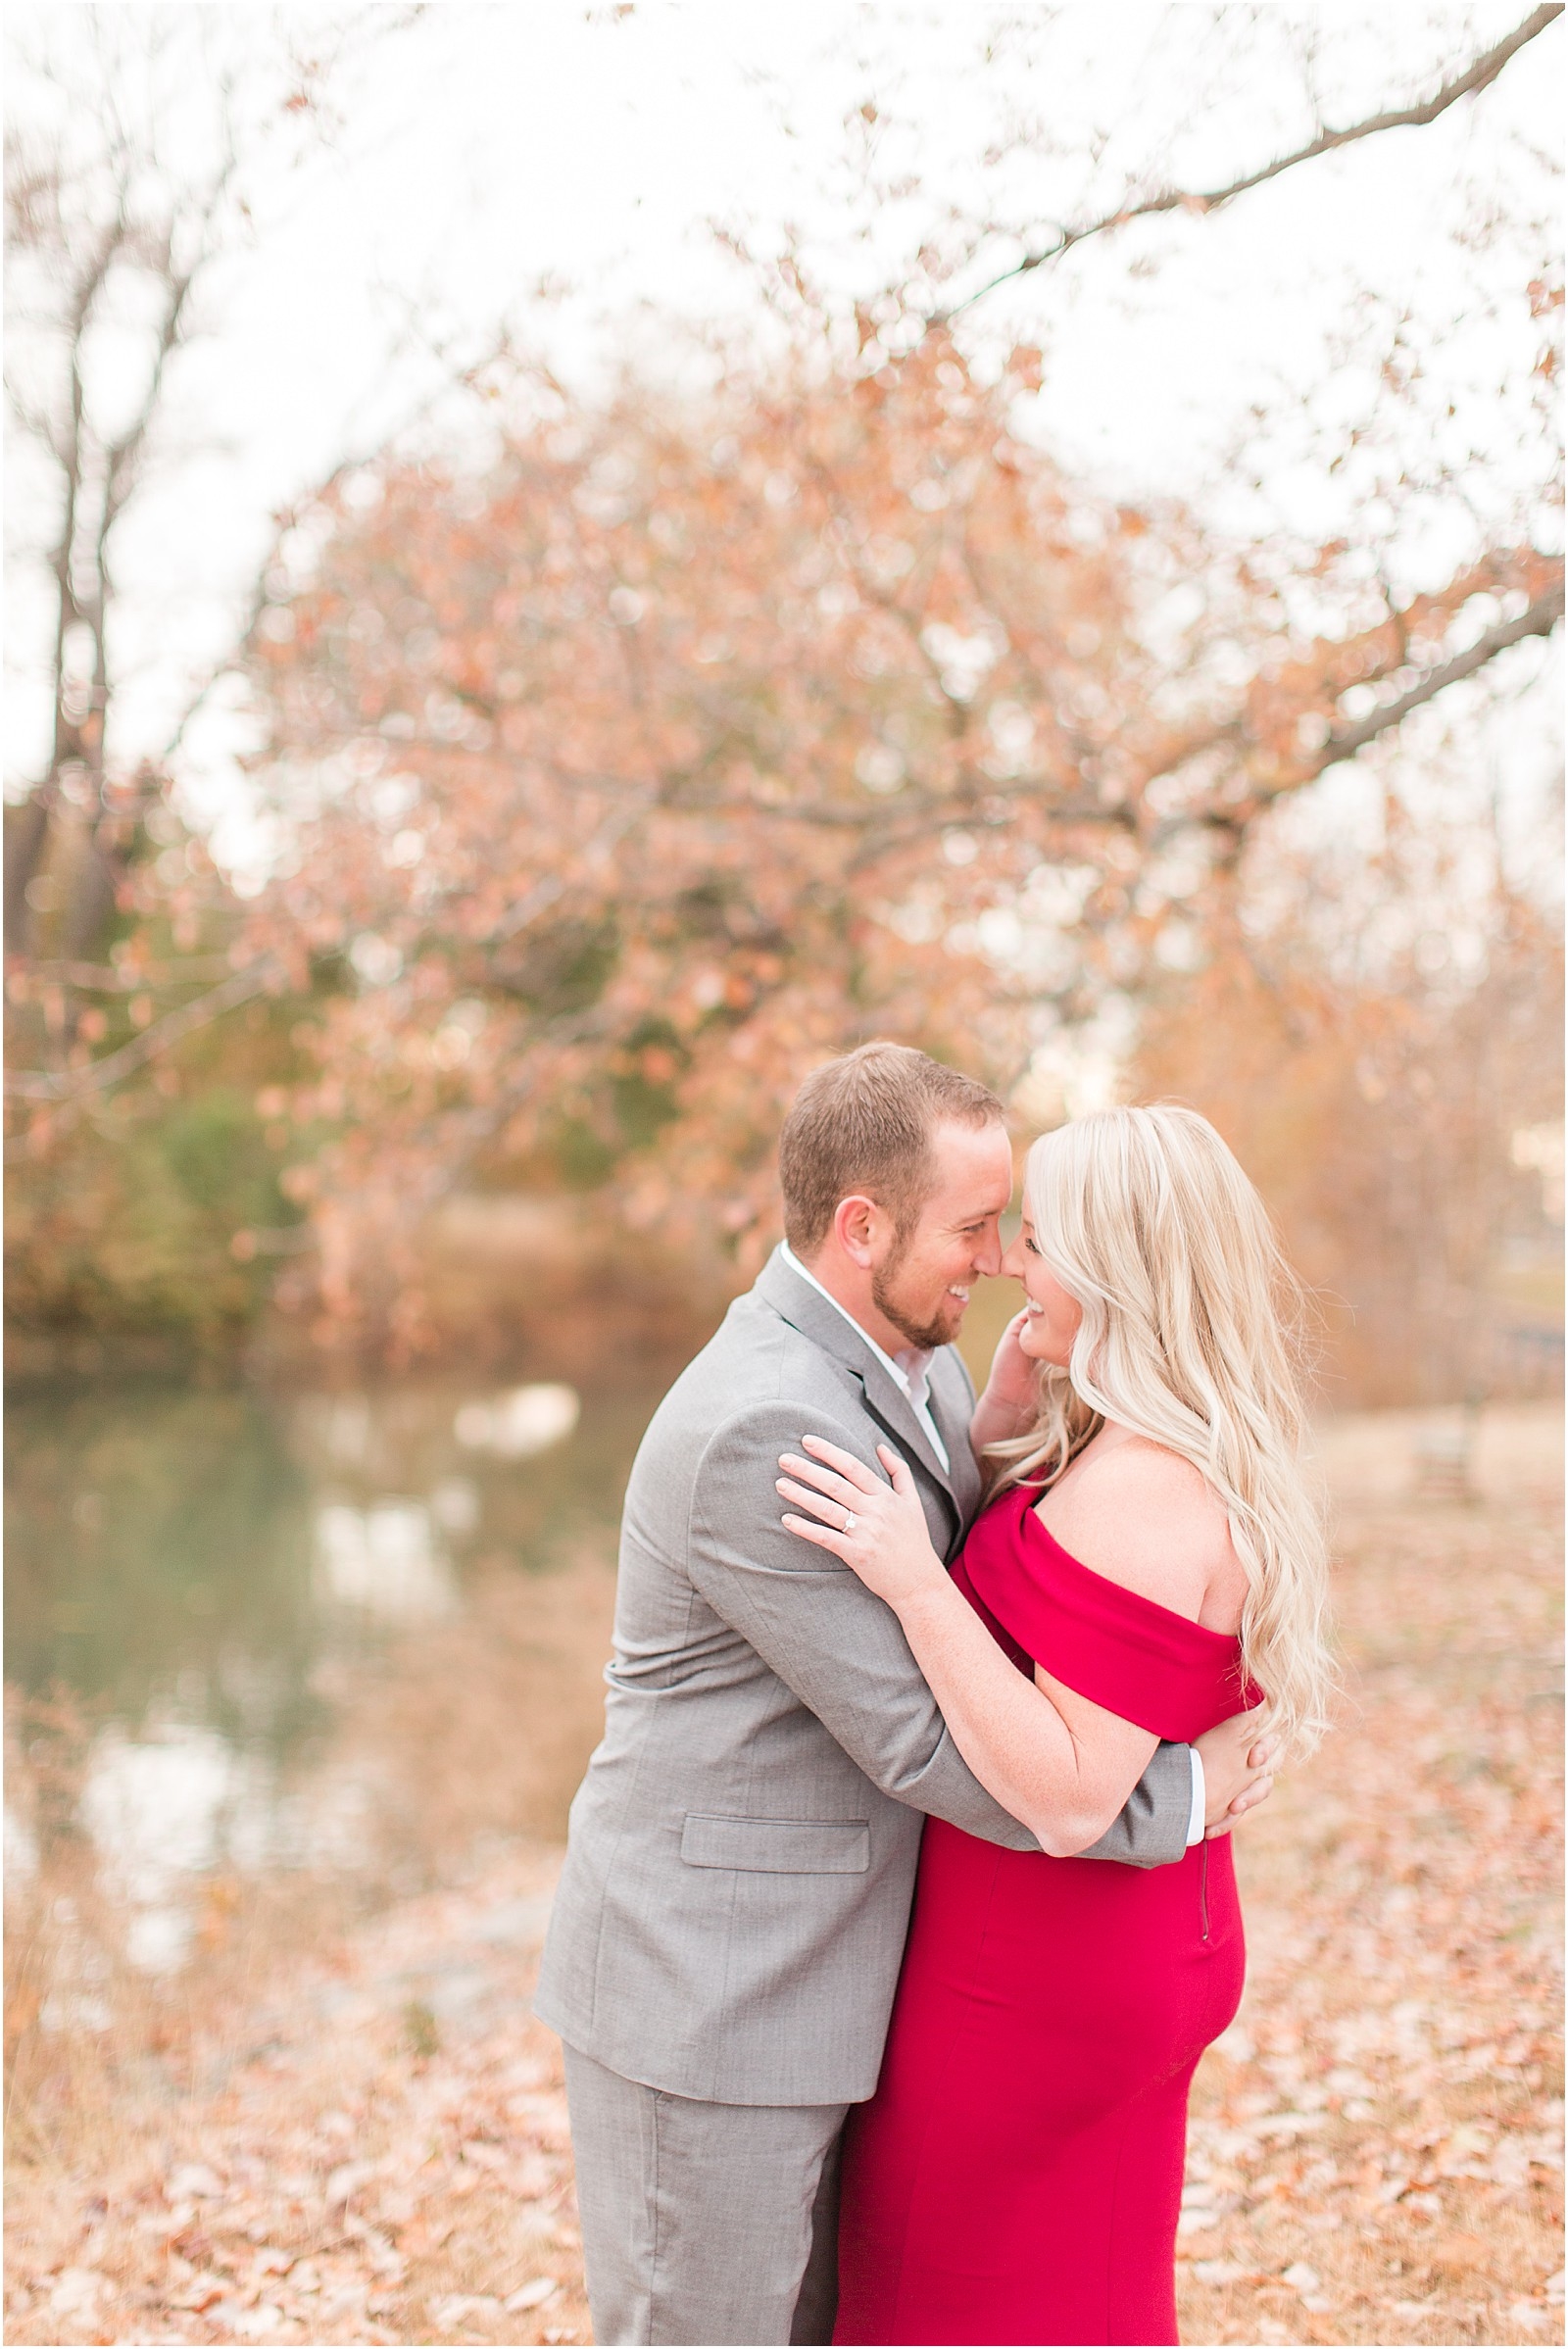 A Perfect Fall Engagement Session at Evansville State Park | Jamie and Max | Bret and Brandie Photography 034.jpg